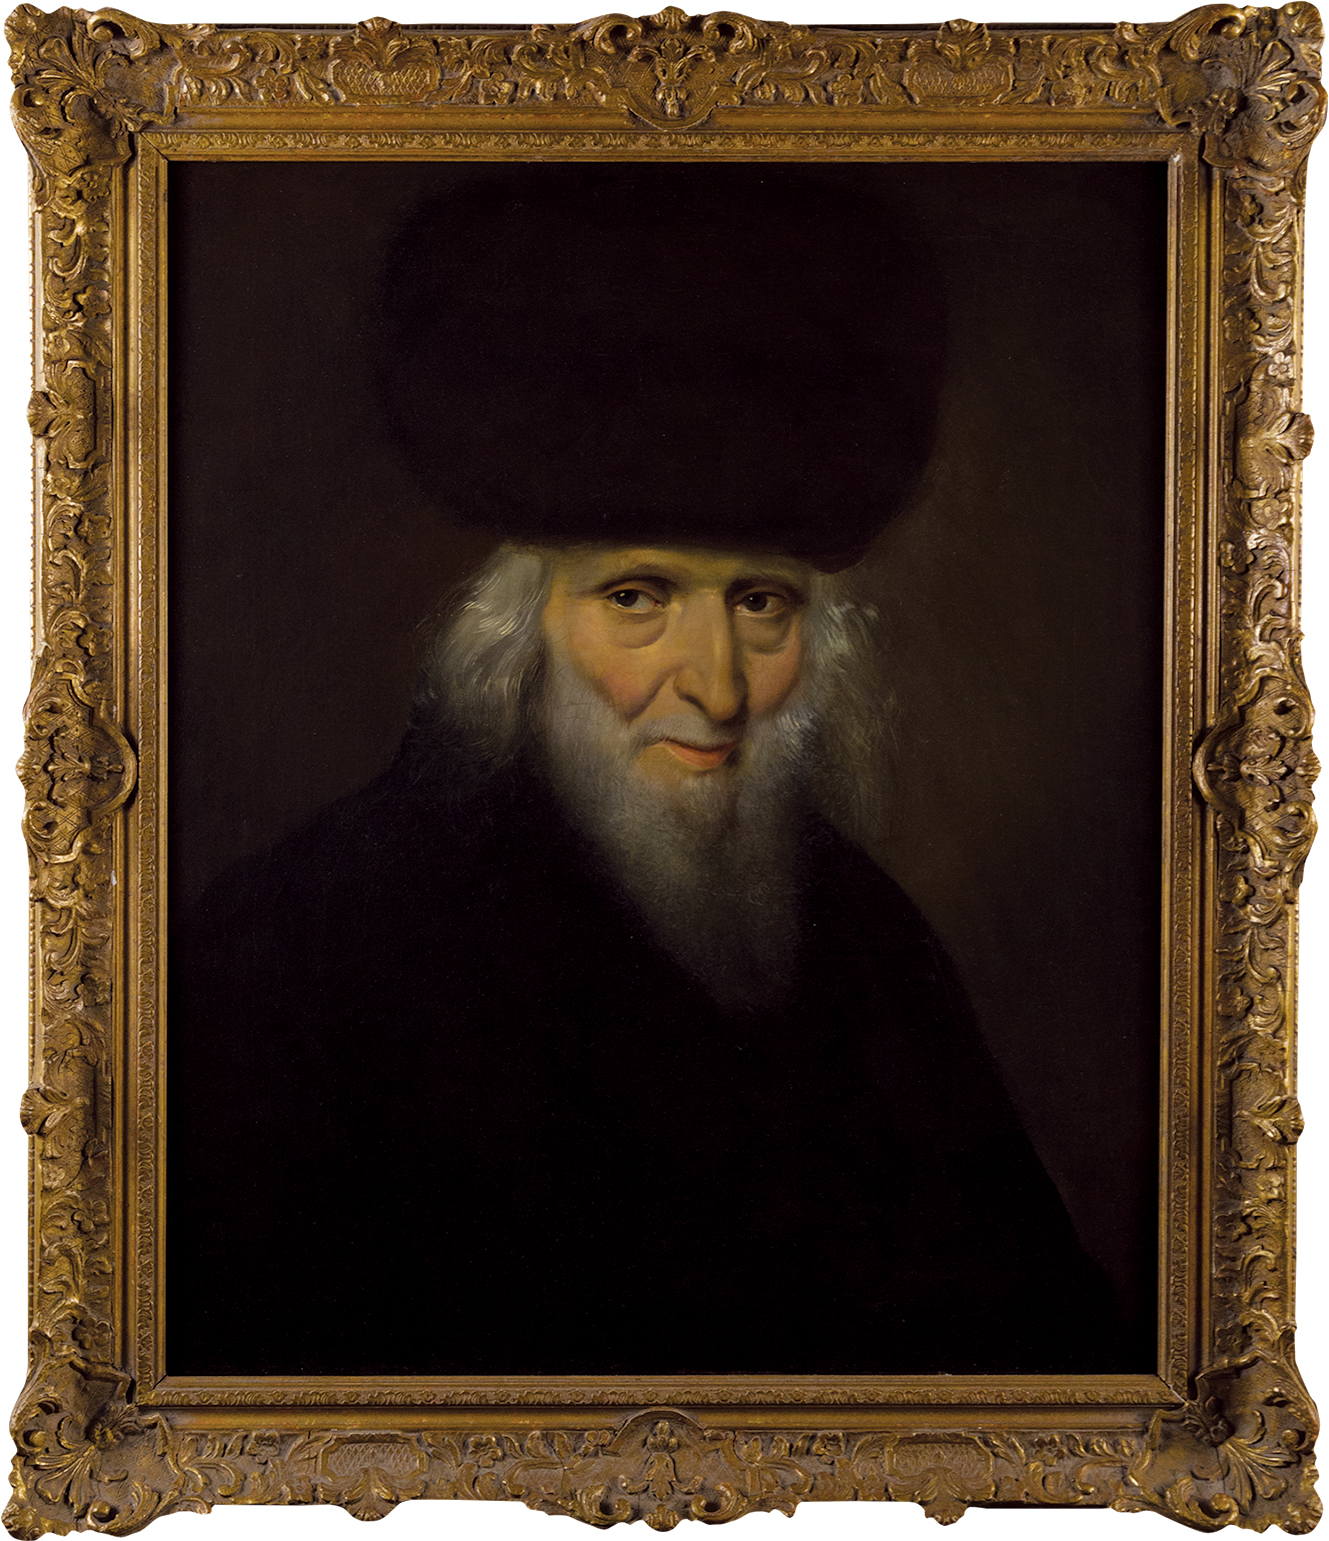 Half-length portrait of The Chasam Sofer, painted in his lifetime. <p> Josef Edward August von Gillern. c. 1835. <p>Sold at auction 8th March, 2018. <p>Hammer-price: $37,500.